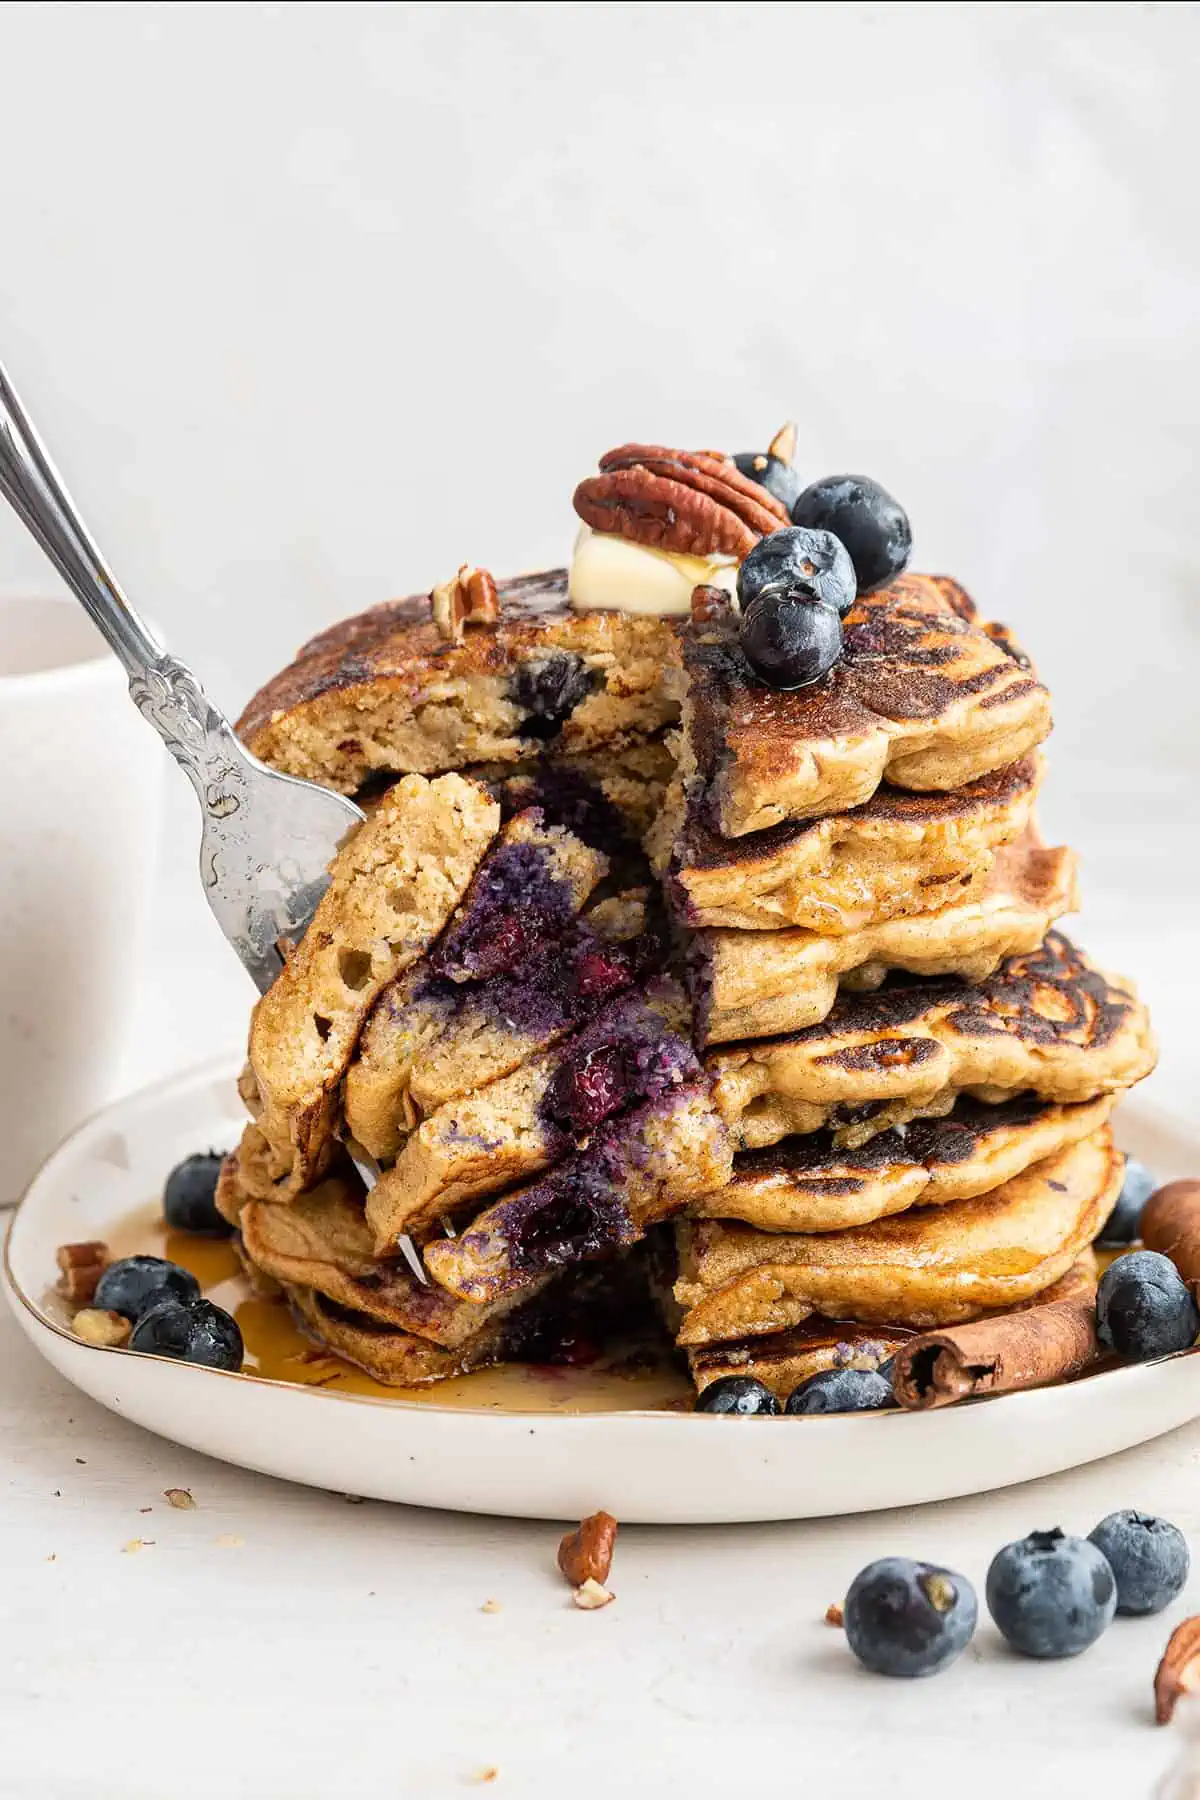 A fork taking a large bite out of a stack of seven blueberry pancakes on a white plate, topped with butter, blueberries, and a pecan